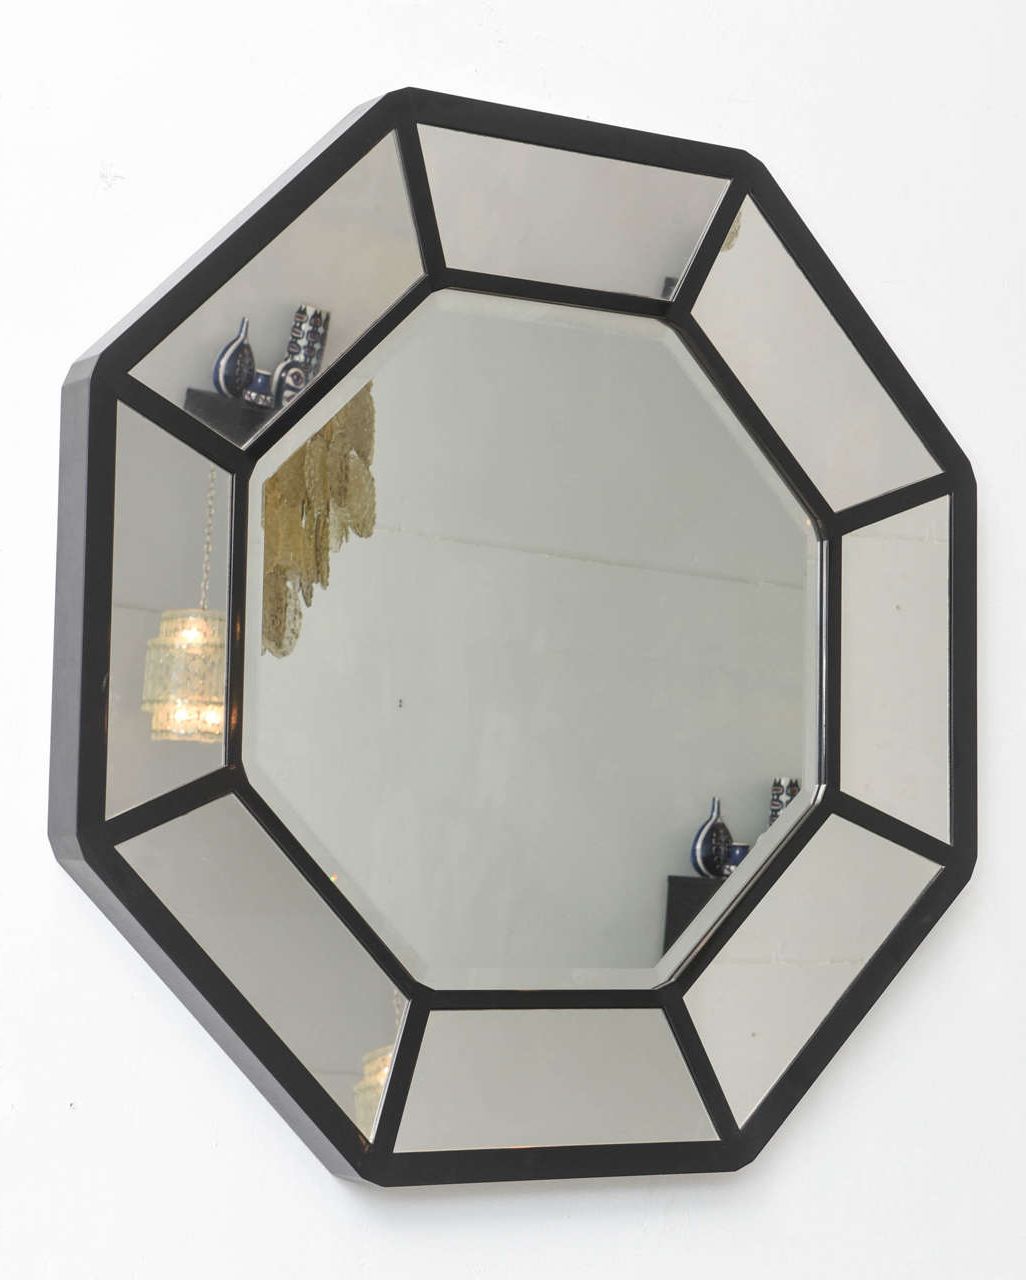 2019 Matte Black Octagonal Wall Mirrors With Regard To American Modern Black Lacquer Octagonal Mirror, Karl Springer At 1stdibs (View 4 of 15)